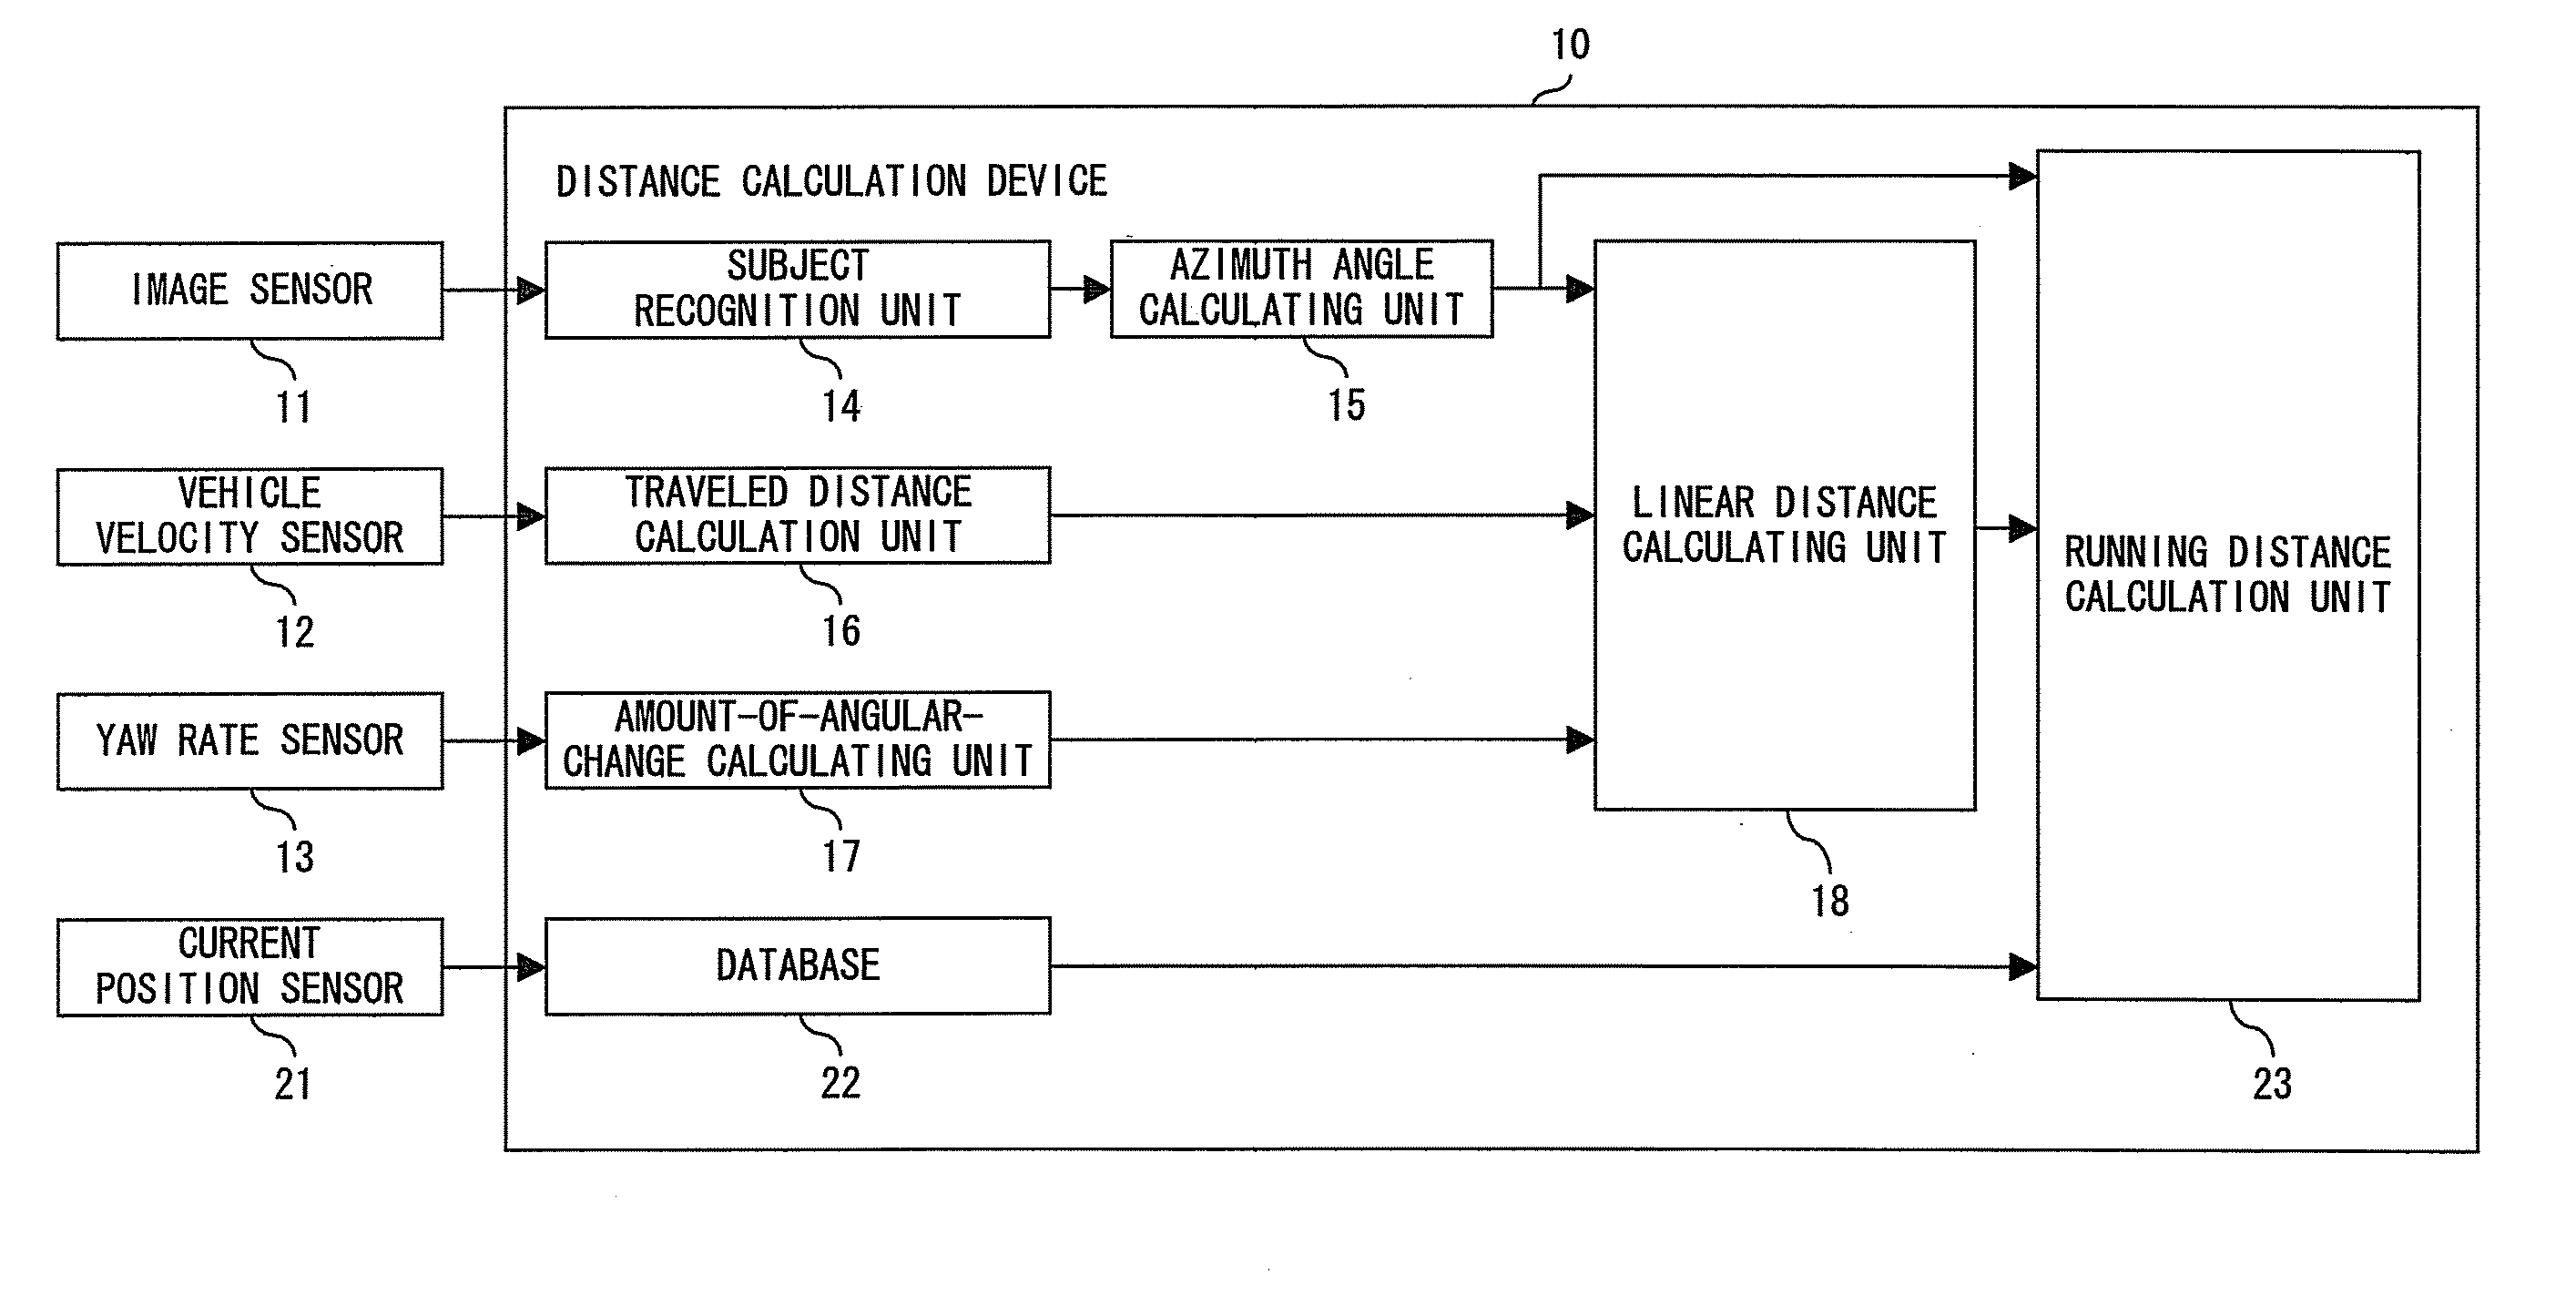 Distance calculation device and calculation program